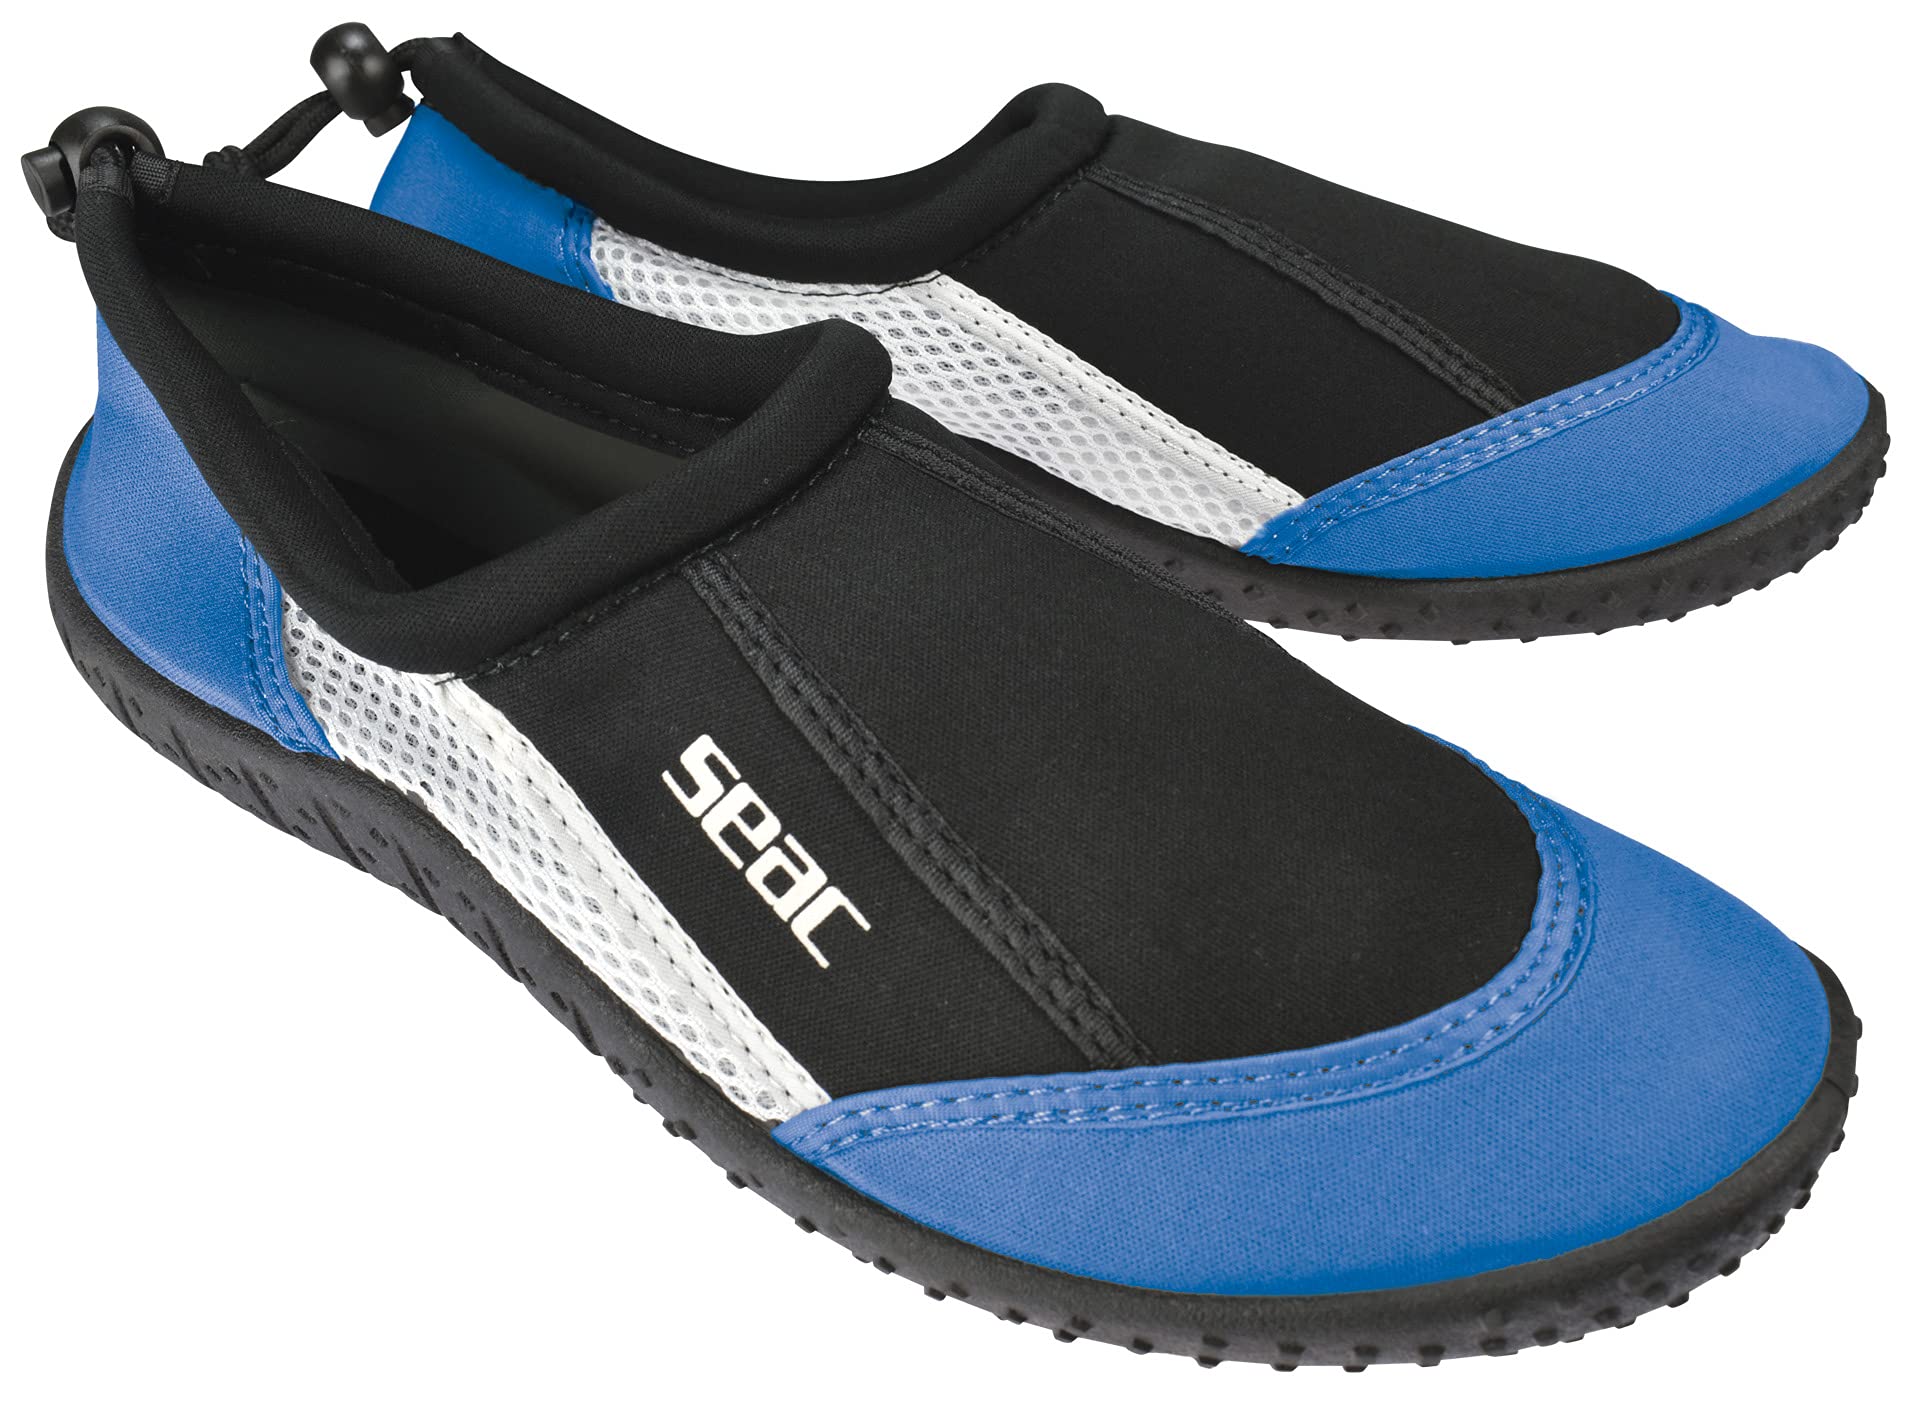 Seac Reef Water Sports Shoes Barefoot Quick-dry Aqua Waterproof Water Shoes